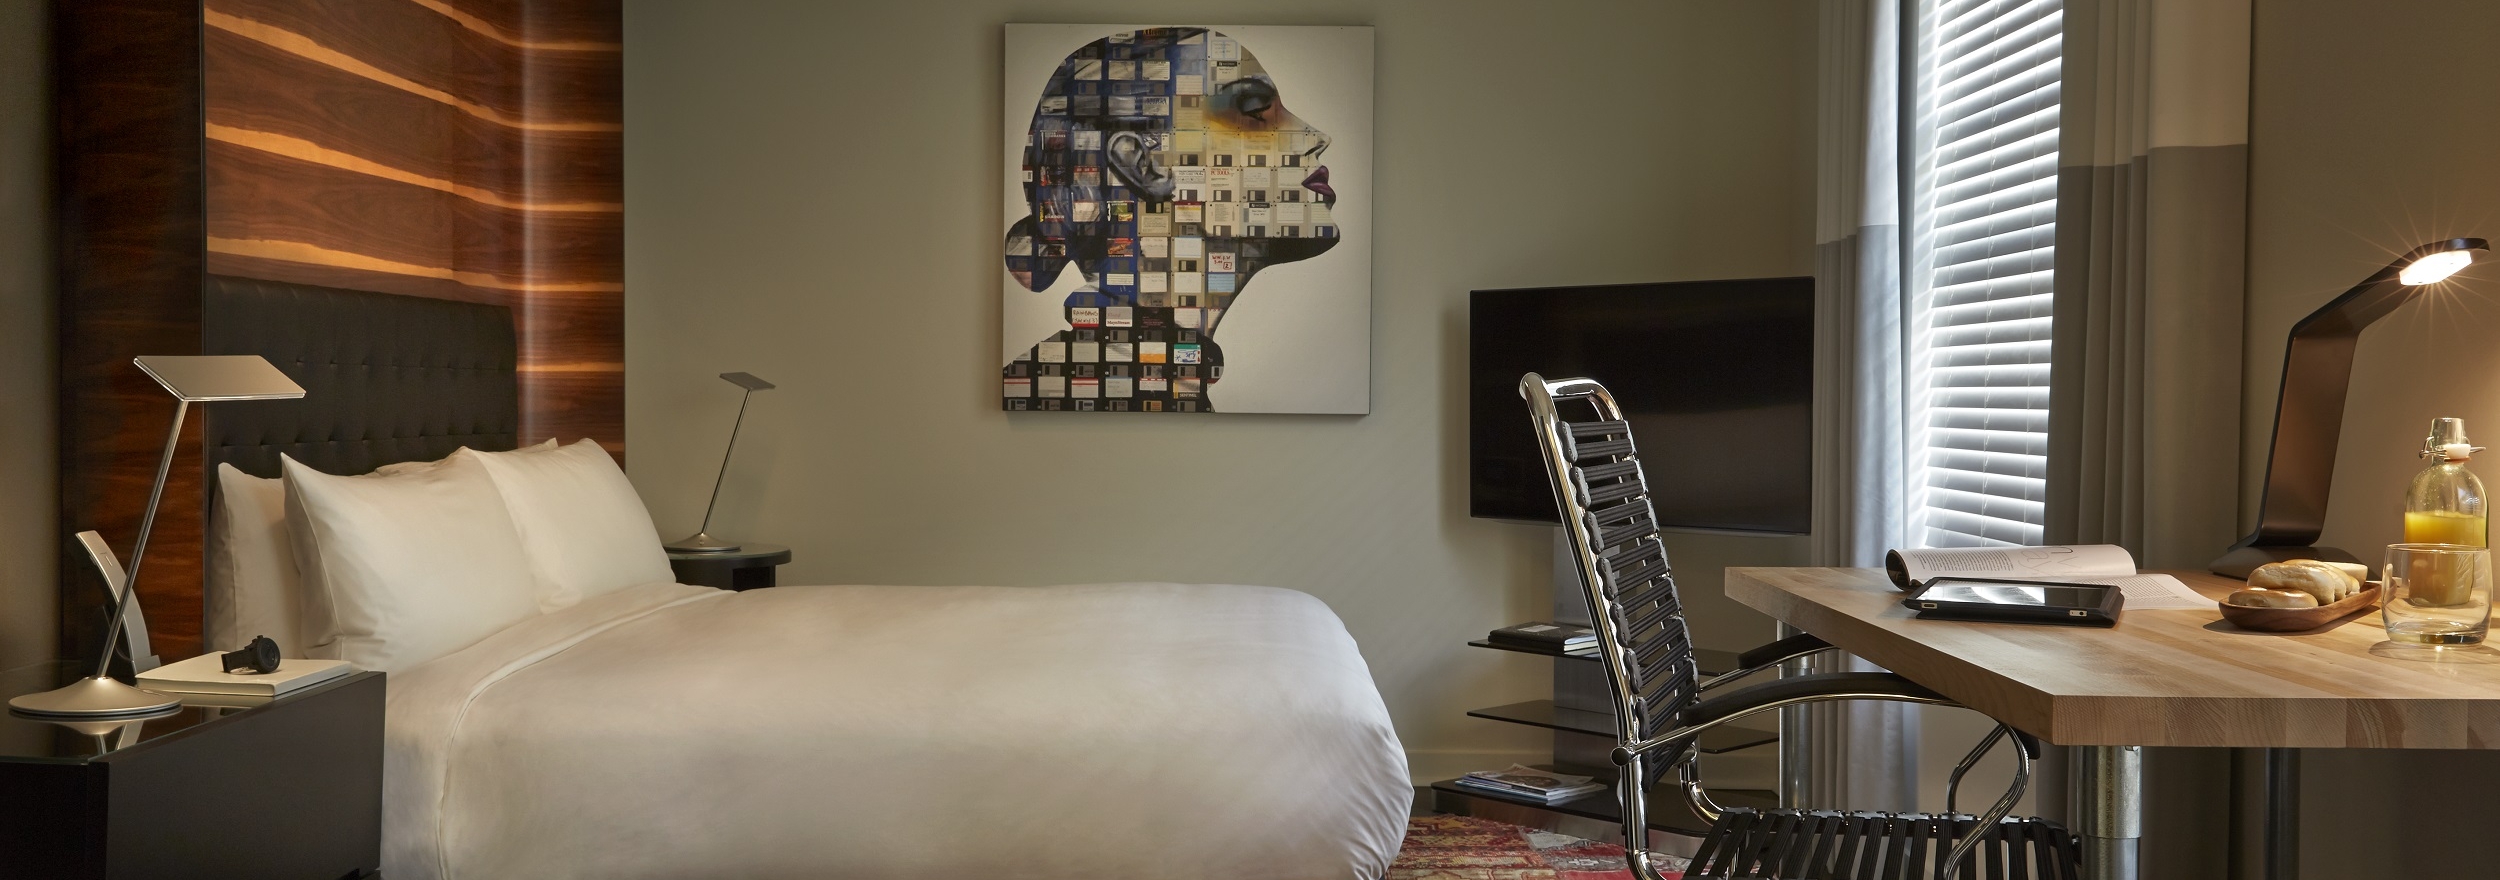 Z Hotel in San Francisco Offer: Book Two Nights and Receive Your Third Night for Free, based on availability; Styled San Francisco hotel room with queen bed, work desk and modern collage of a woman hanging on wall.